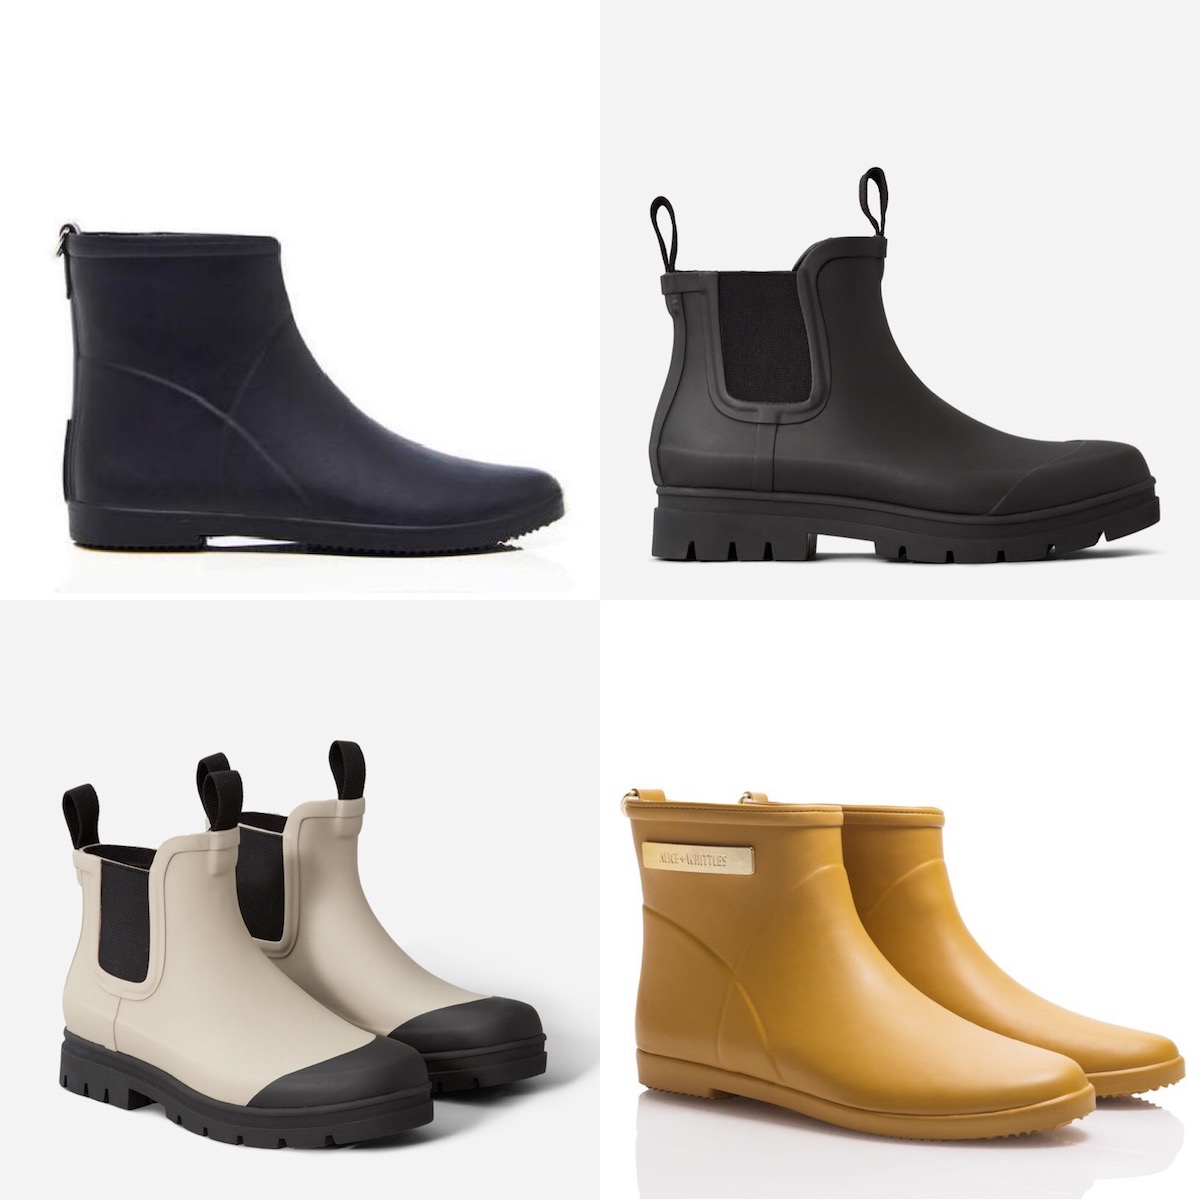 Everlane vs Alice + Whittles ethical rain boots: Stock photos of four pairs of rain boots, one in each quardrant of the square image.